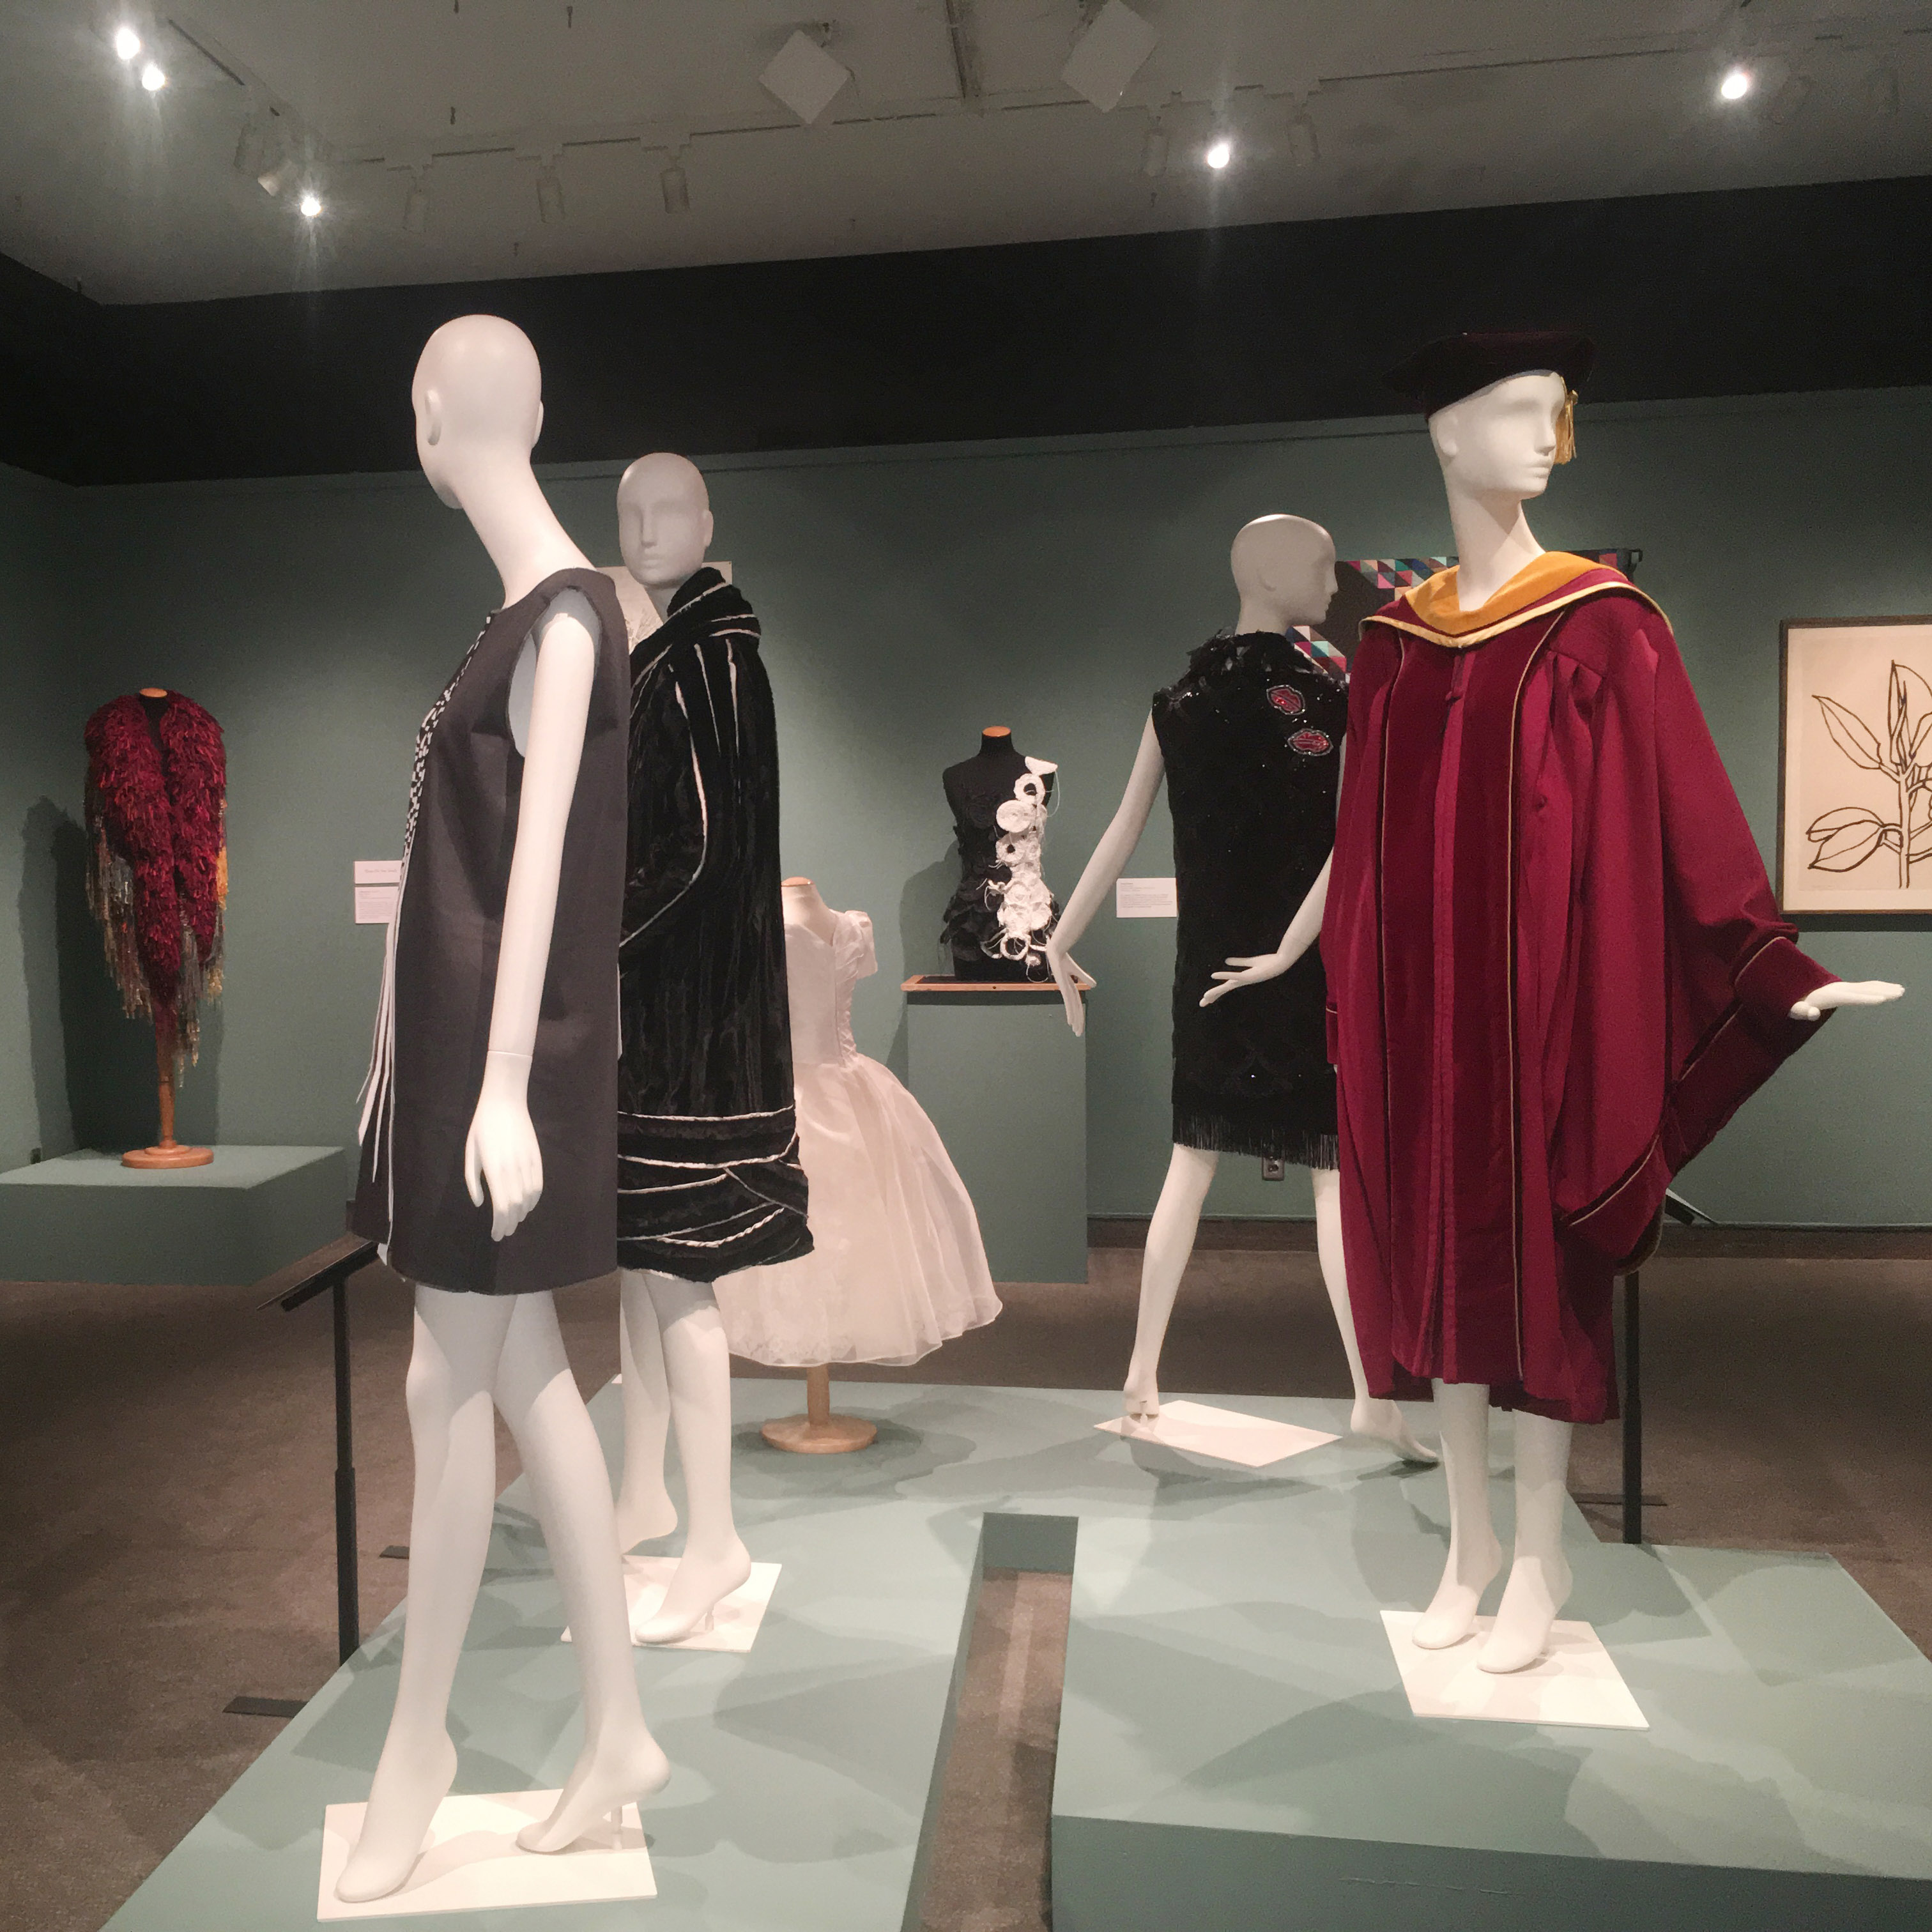 DHA 100 years of graduate education exhibition clothing on display in gallery